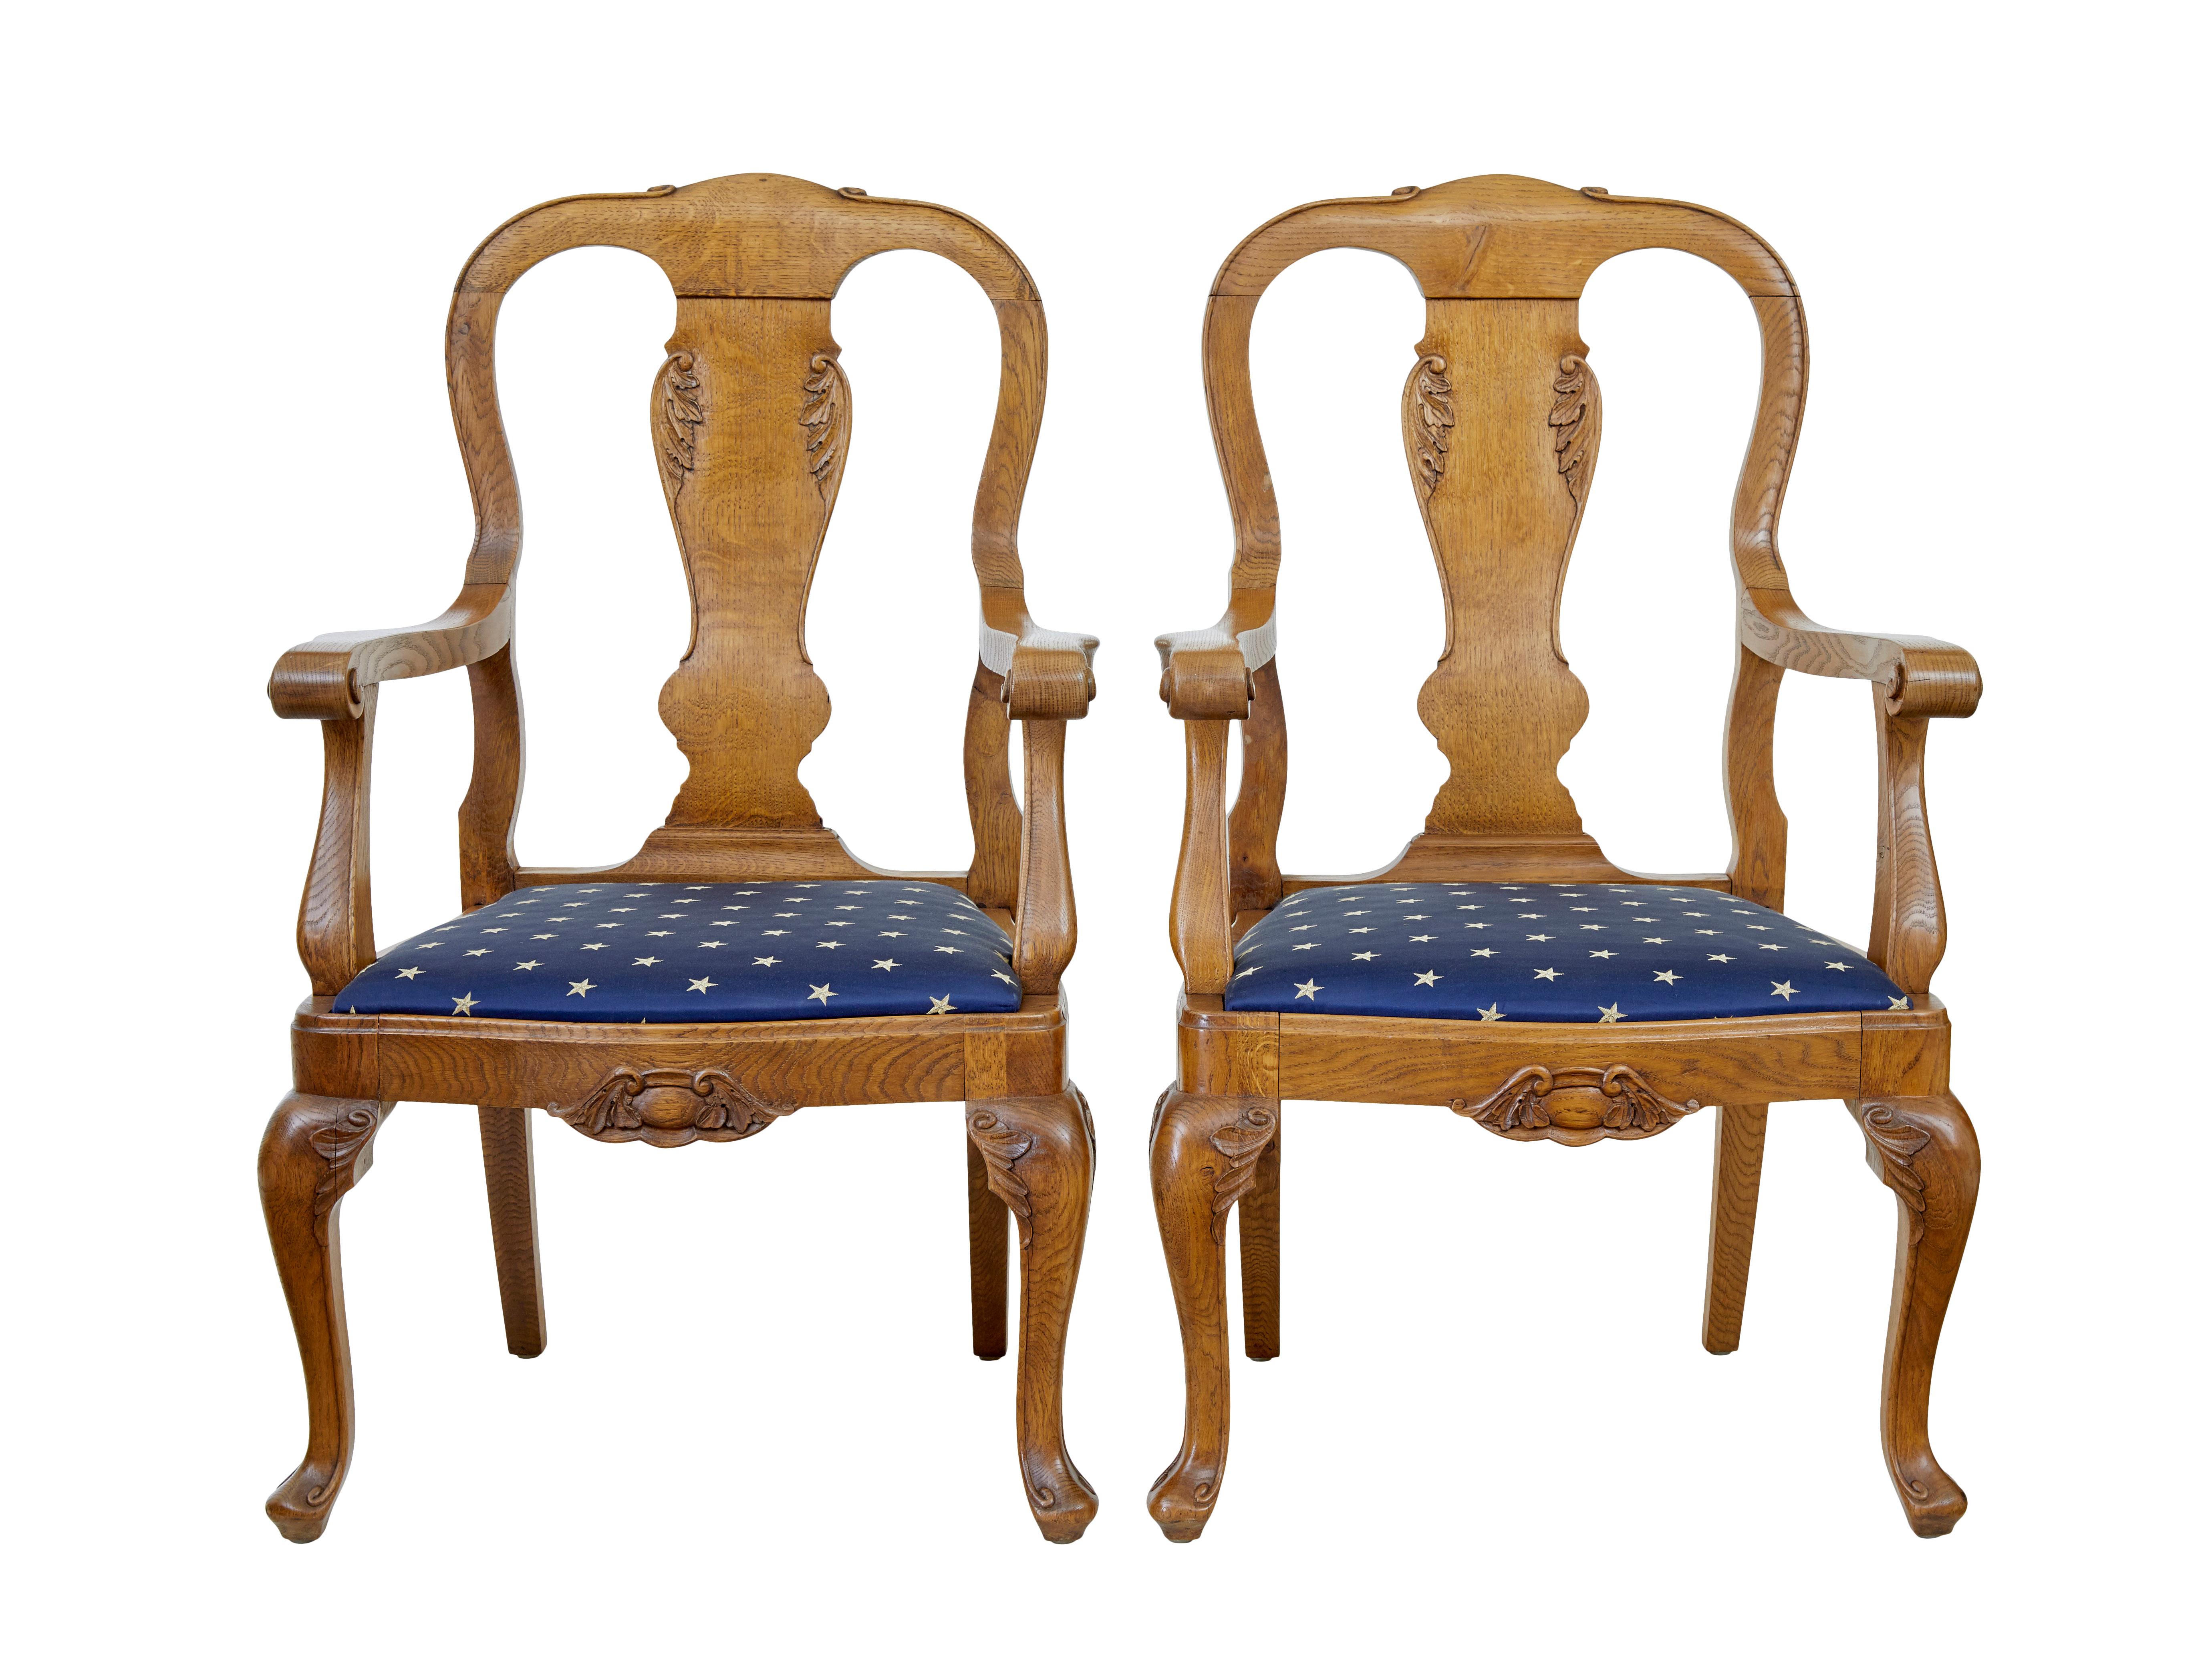 Pair of carved oak 19th century armchairs circa 1890.

Good quality pair of chairs very much in the taste of chippendale.  Typical shaped back rest with carved detailing.  Scrolled arms and supports, further carving to the front rail.  Standing on